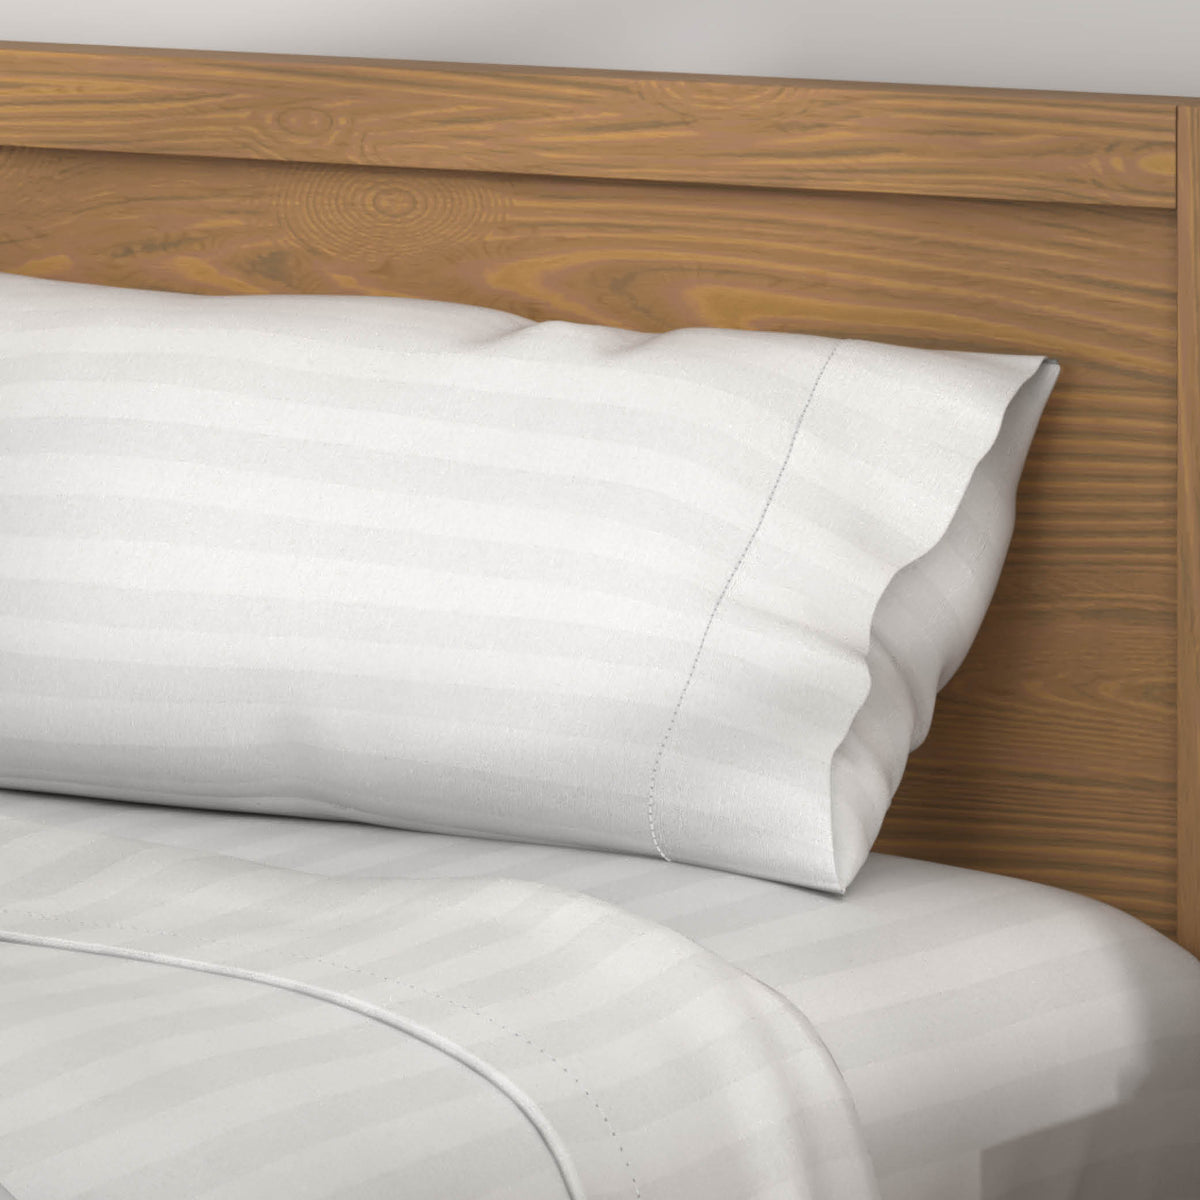 Image of the Luxury Resort Hotel Collection Classic Cotton Pillowcase on a pillow on a neatly made bed